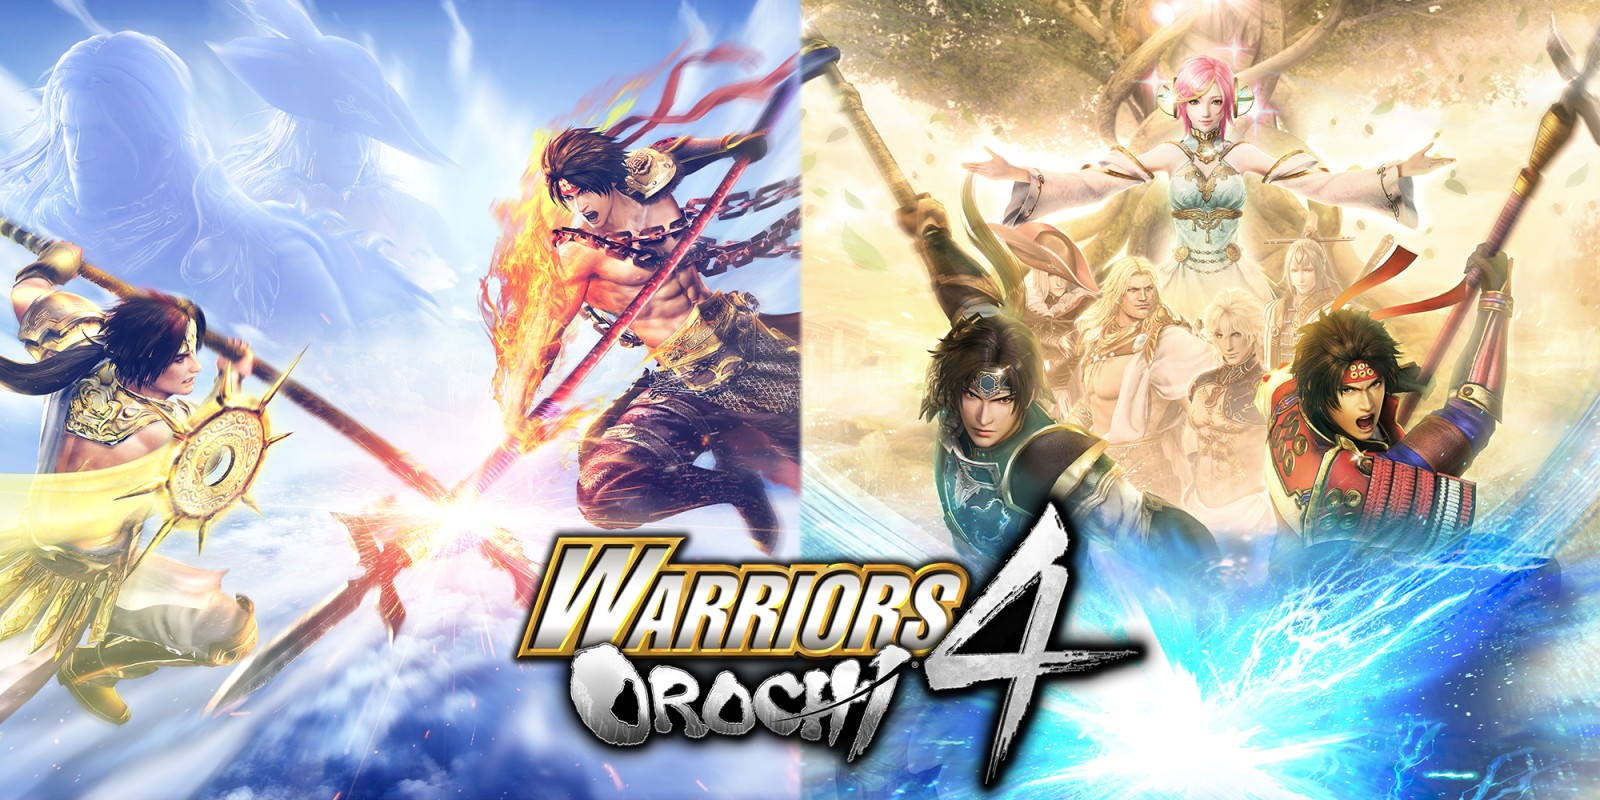 Warriors orochi 4 official site